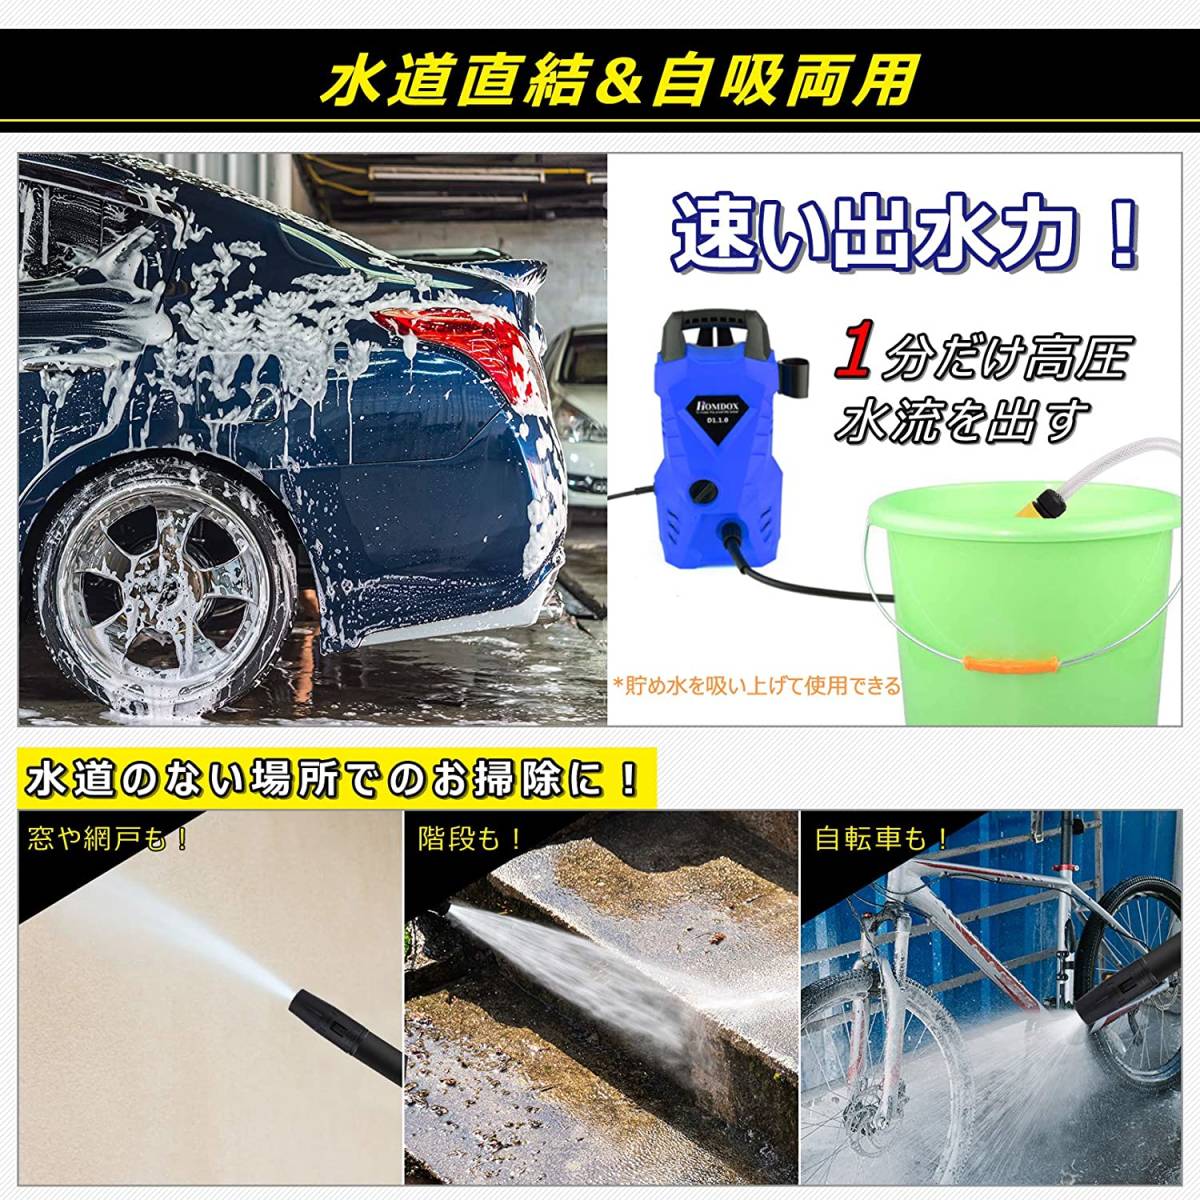 [ great special price ] high pressure washer 1400W height pressure car wash machine powerful 50Hz/60Hz higashi west Japan combined use small size light weight height pressure hose 10m water service hose 3m...15 set 